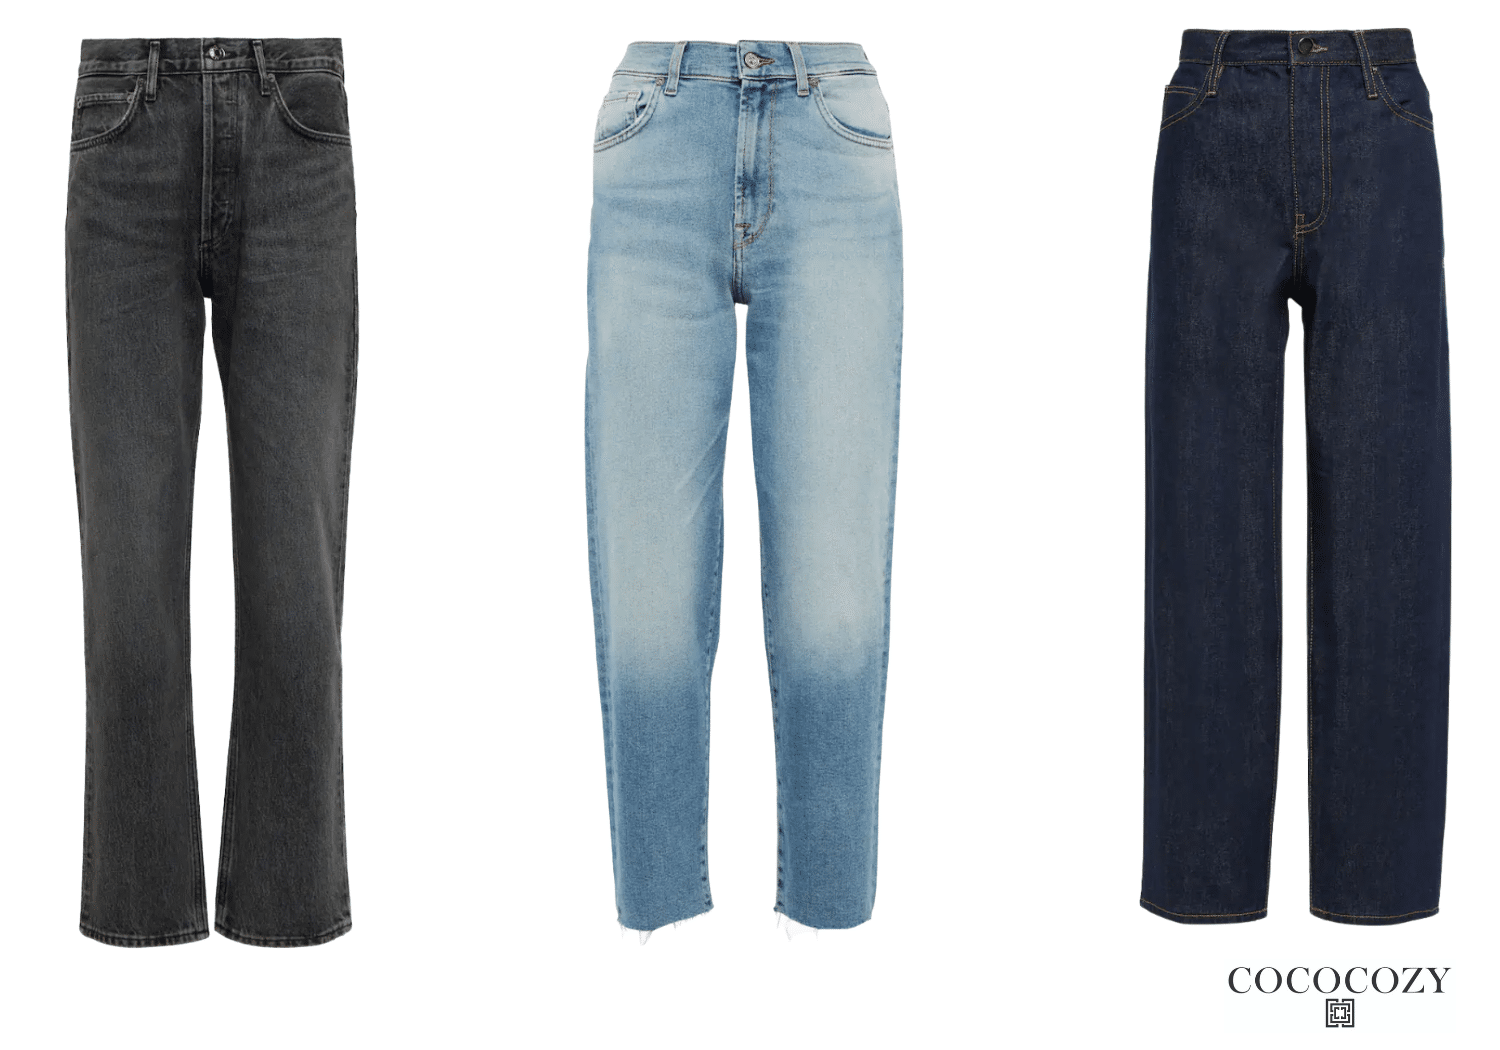 The Essentials: 12 Jeans Everyone Needs COCOCOZY